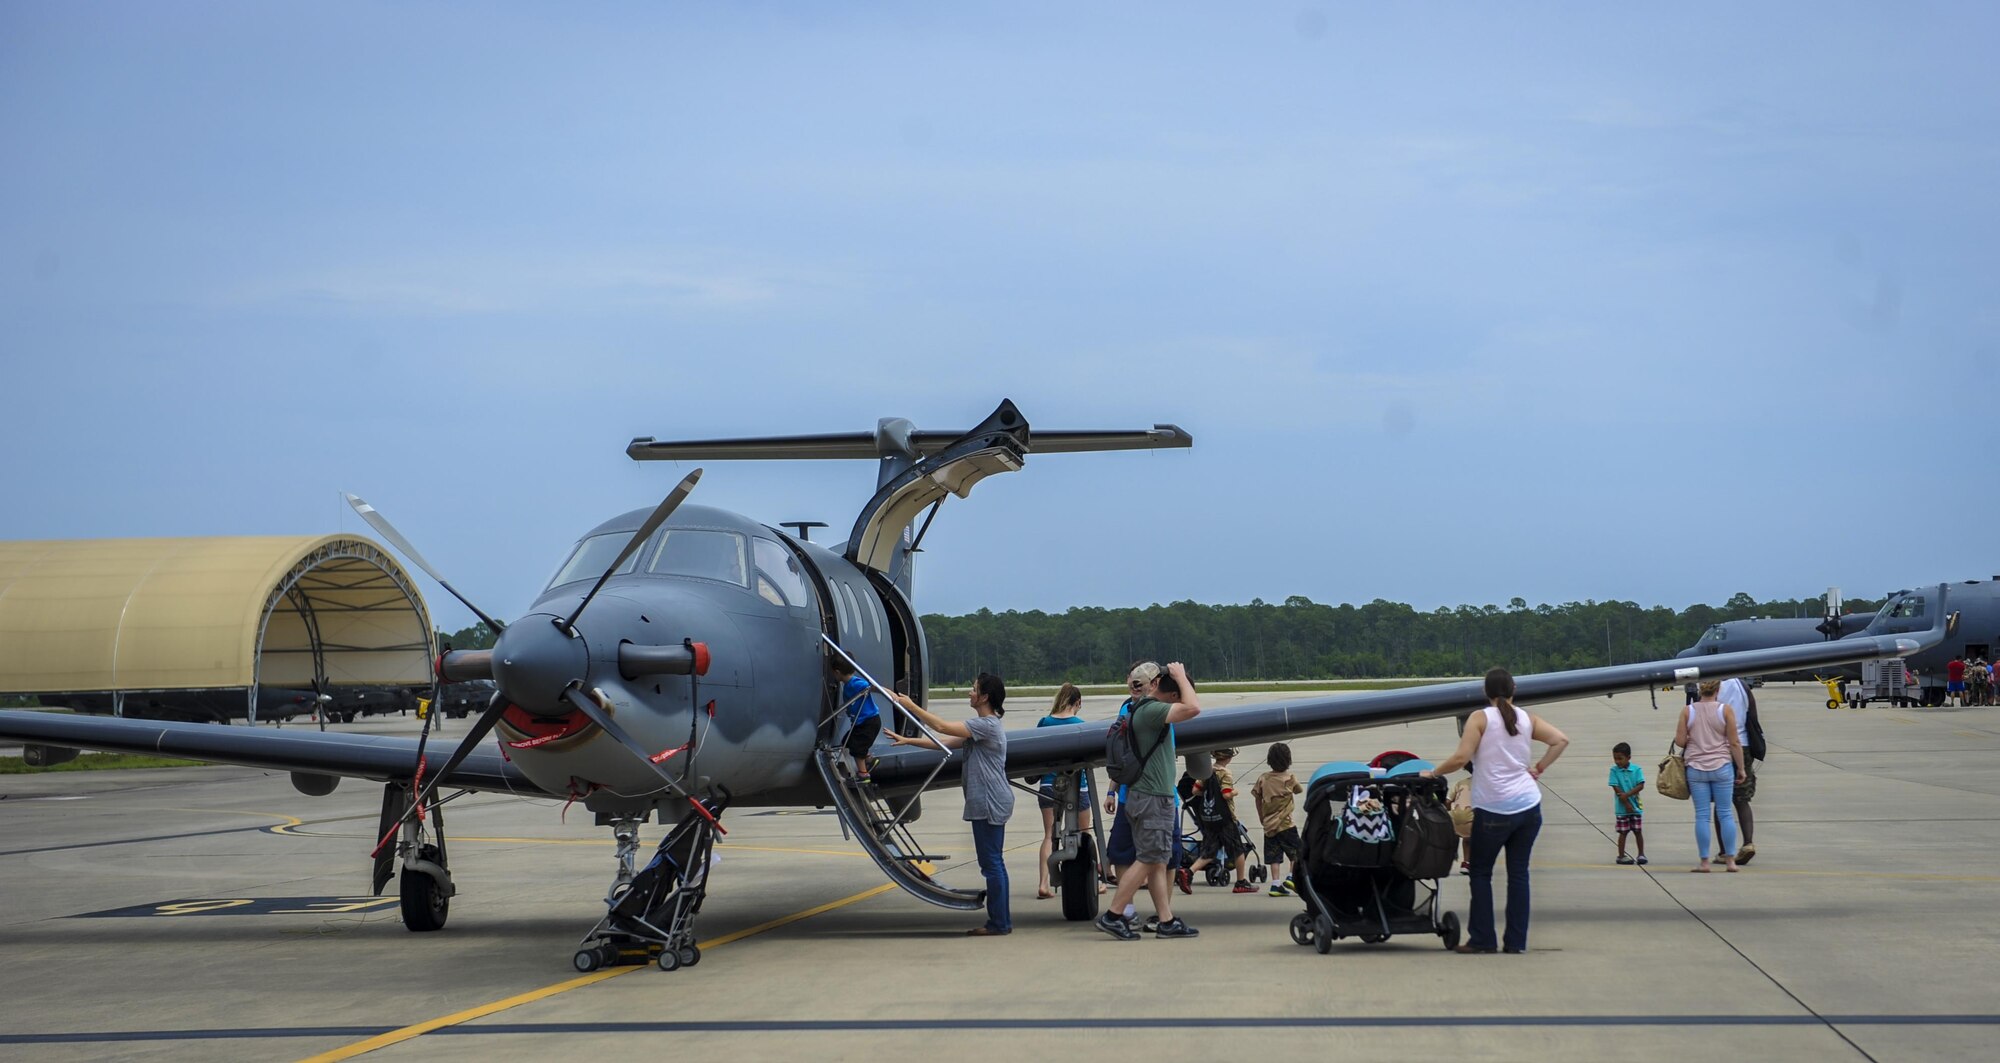 Families tour a U-28A during Operation Kids Understanding Deployment Operations at Hurlburt Field, Fla., April 30, 2016. The School Liaison Program hosted KUDOS to educate kids on the deployment process, engaging them in activities that help show children similar situations their parents go through during pre-deployment. After a “homecoming” families were able to explore aircraft on the flightline. (U.S. Air Force photo by Senior Airman Meagan Schutter)